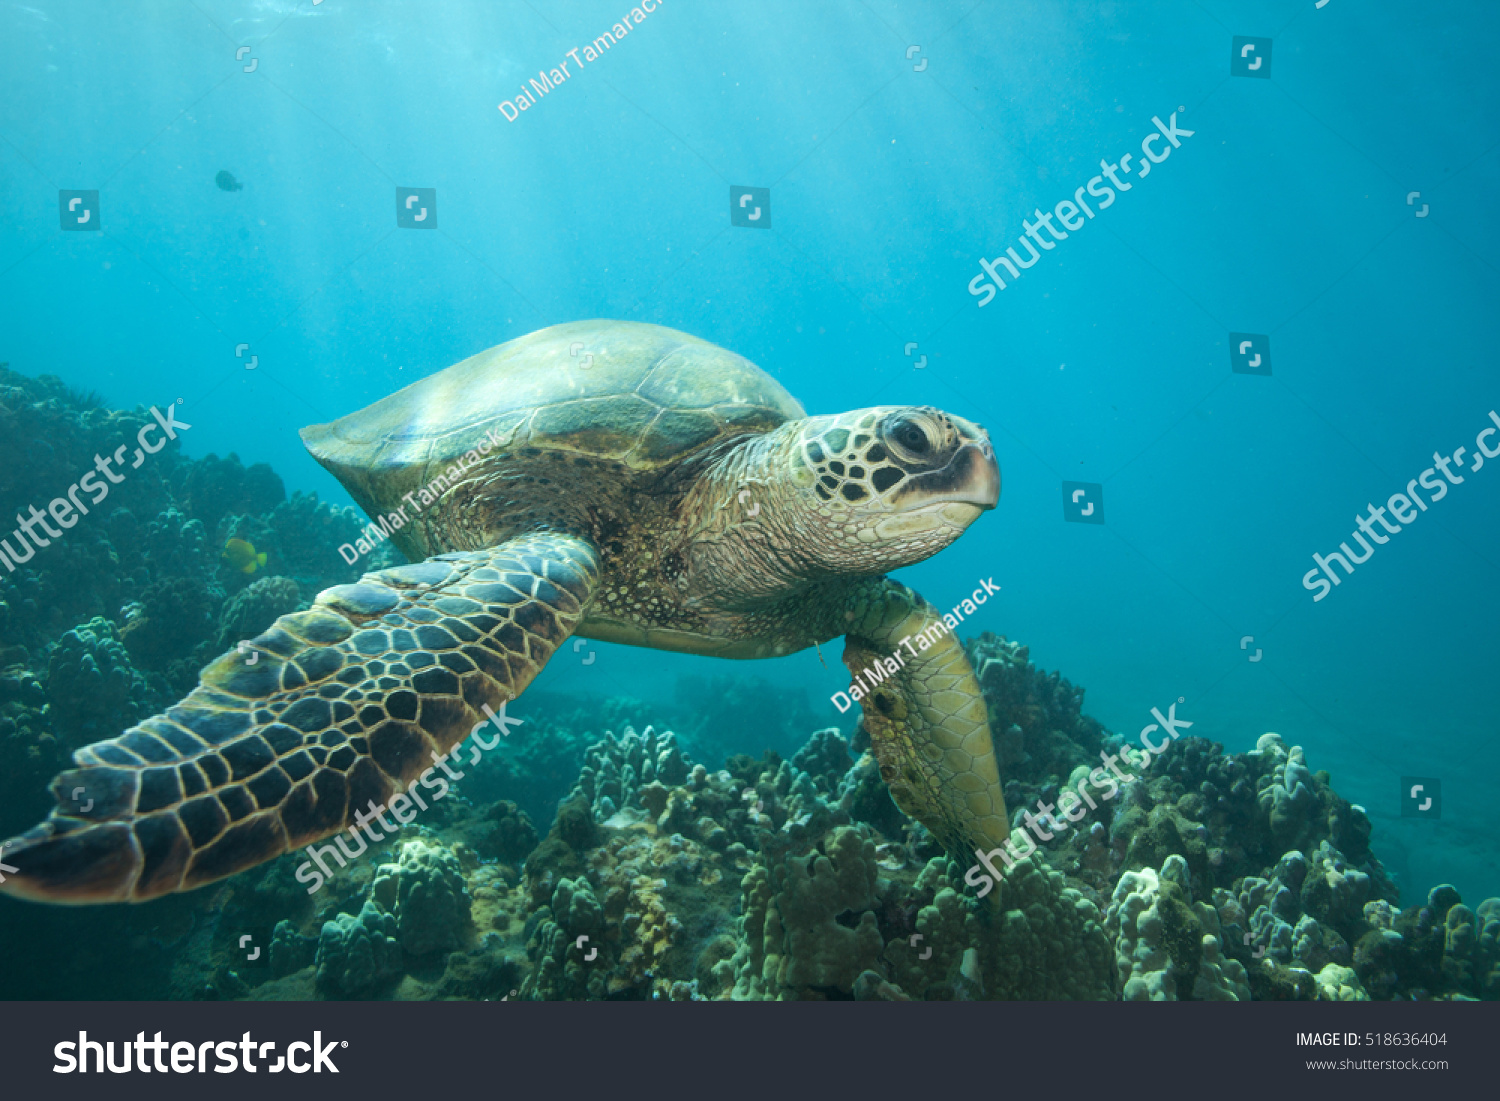 Close encounter with a green sea turtle underwater #518636404